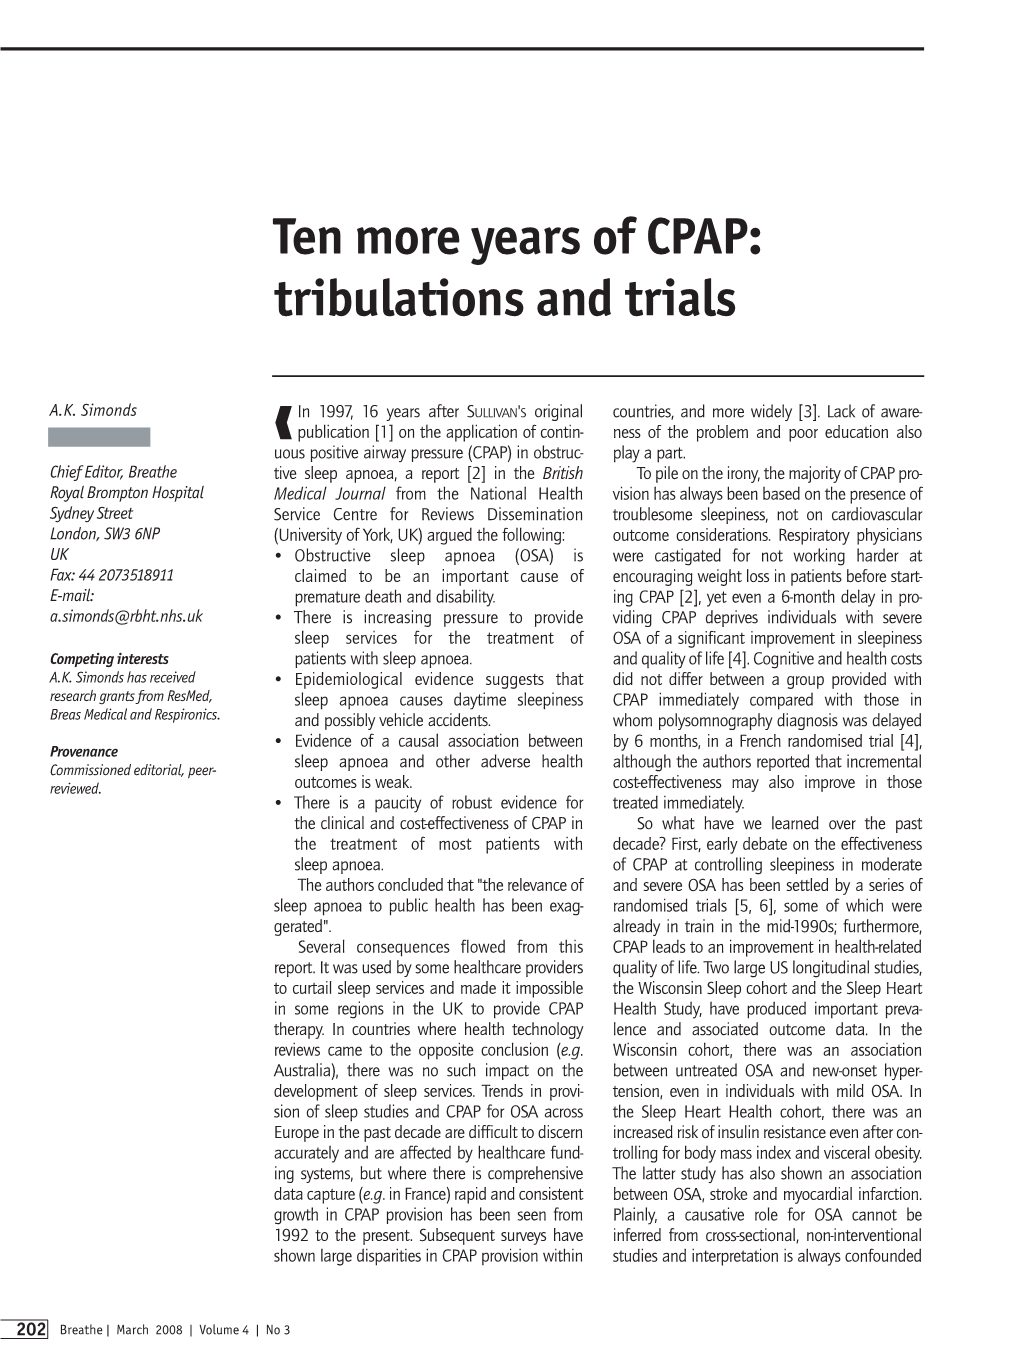 Ten More Years of CPAP: Tribulations and Trials